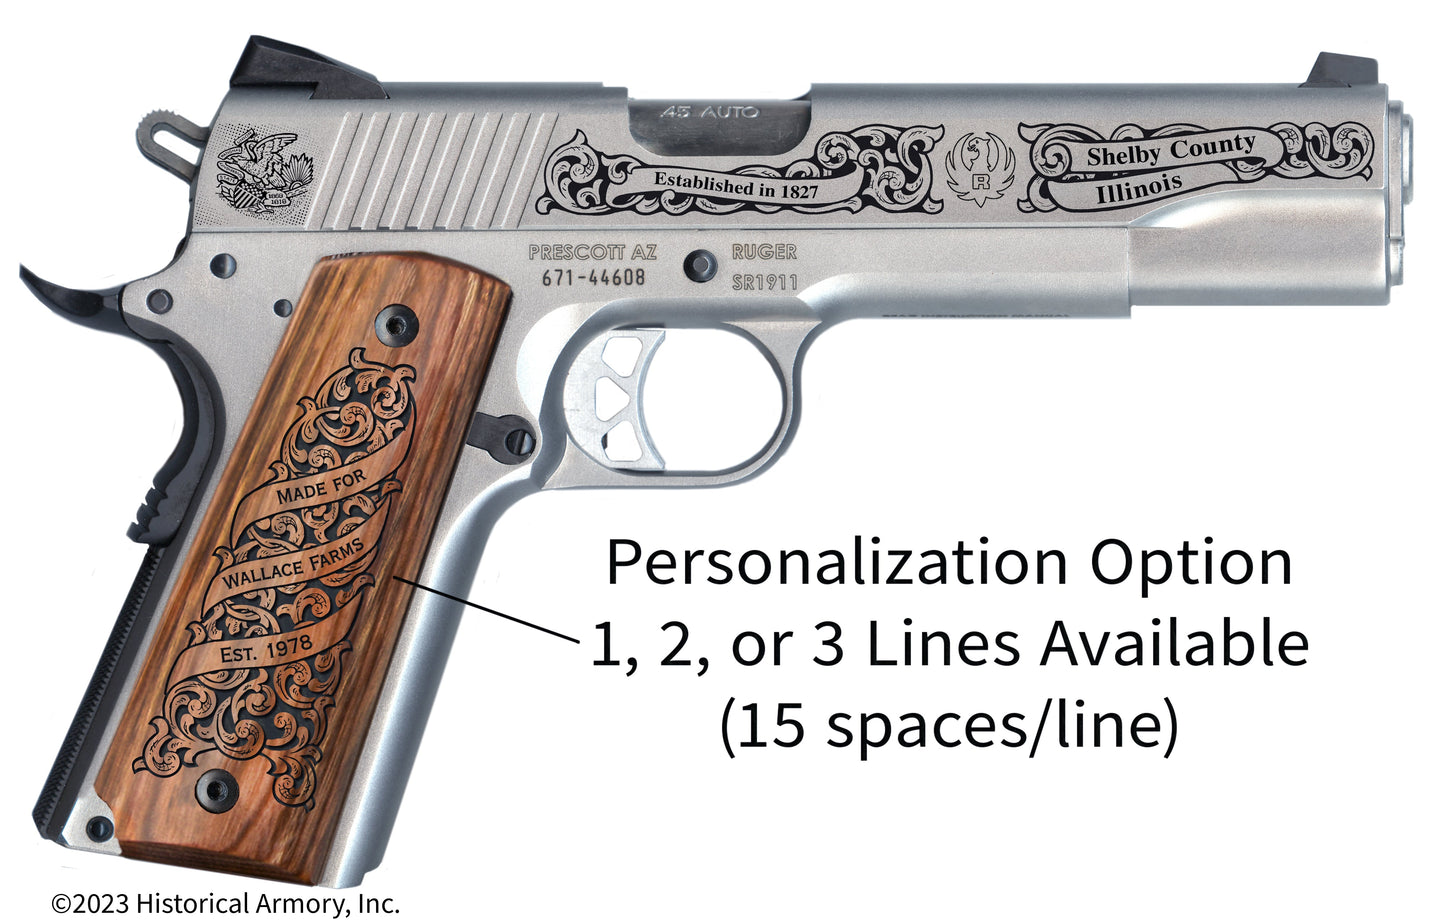 Shelby County Illinois Personalized Engraved .45 Auto Ruger 1911